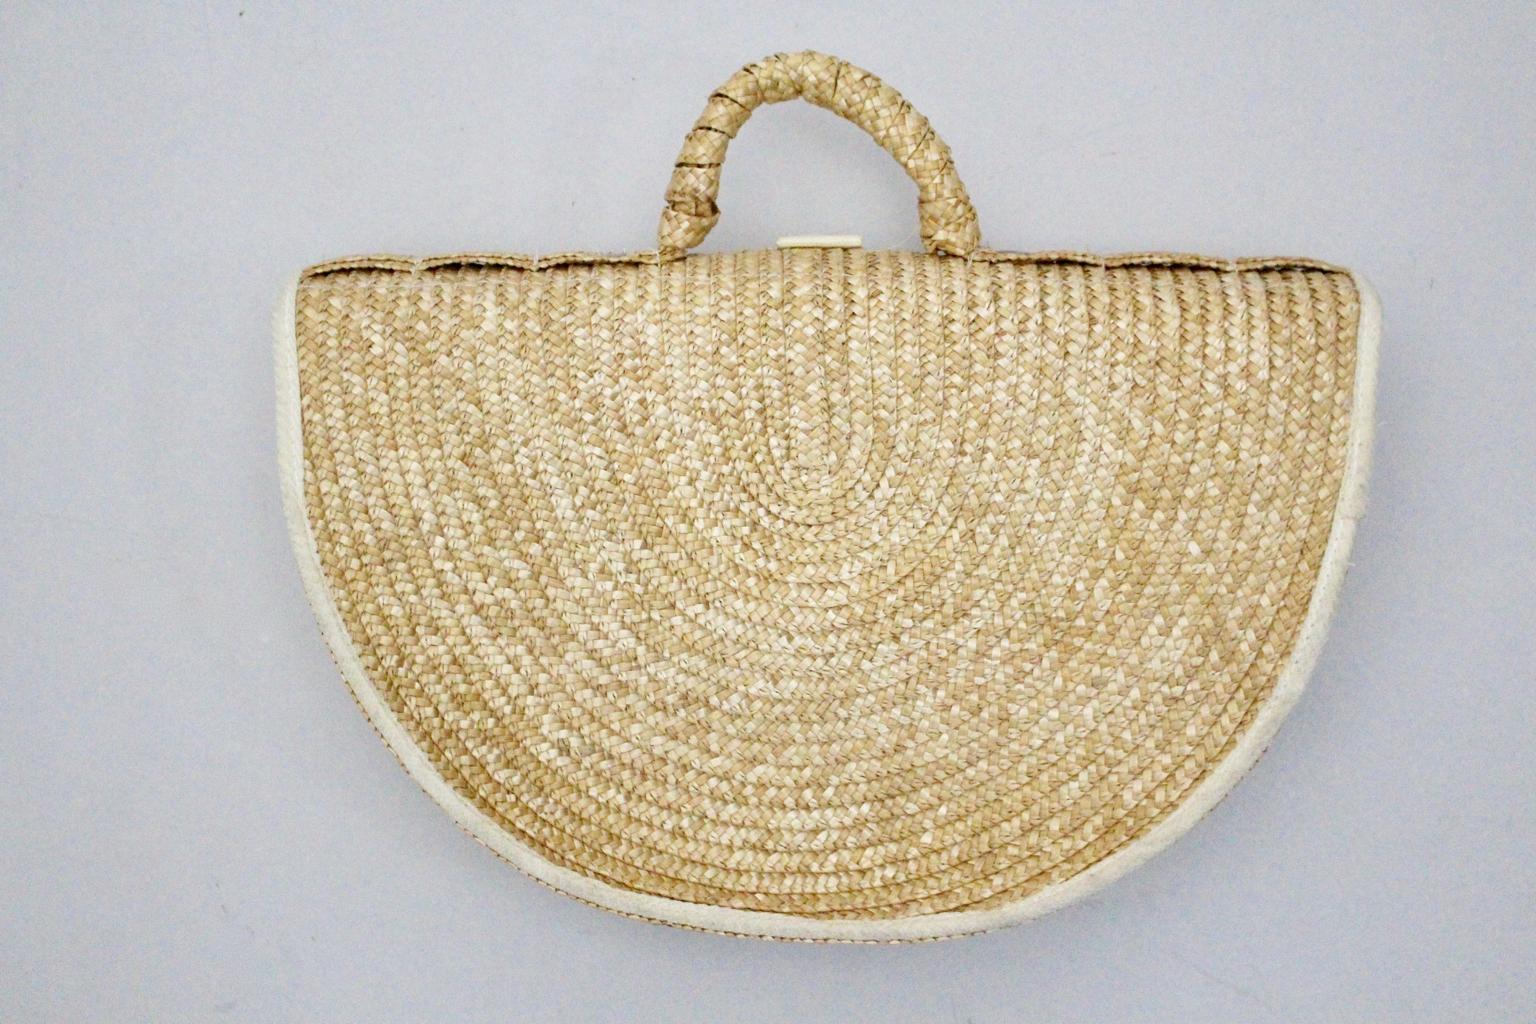 The handle bag was made of straw and shows a decoration with wooden rings and canvas in an extraordinary halfround shape.
Furthermore the handle bag shows a snap button closure. The lining was made of white canvas and features also a small side